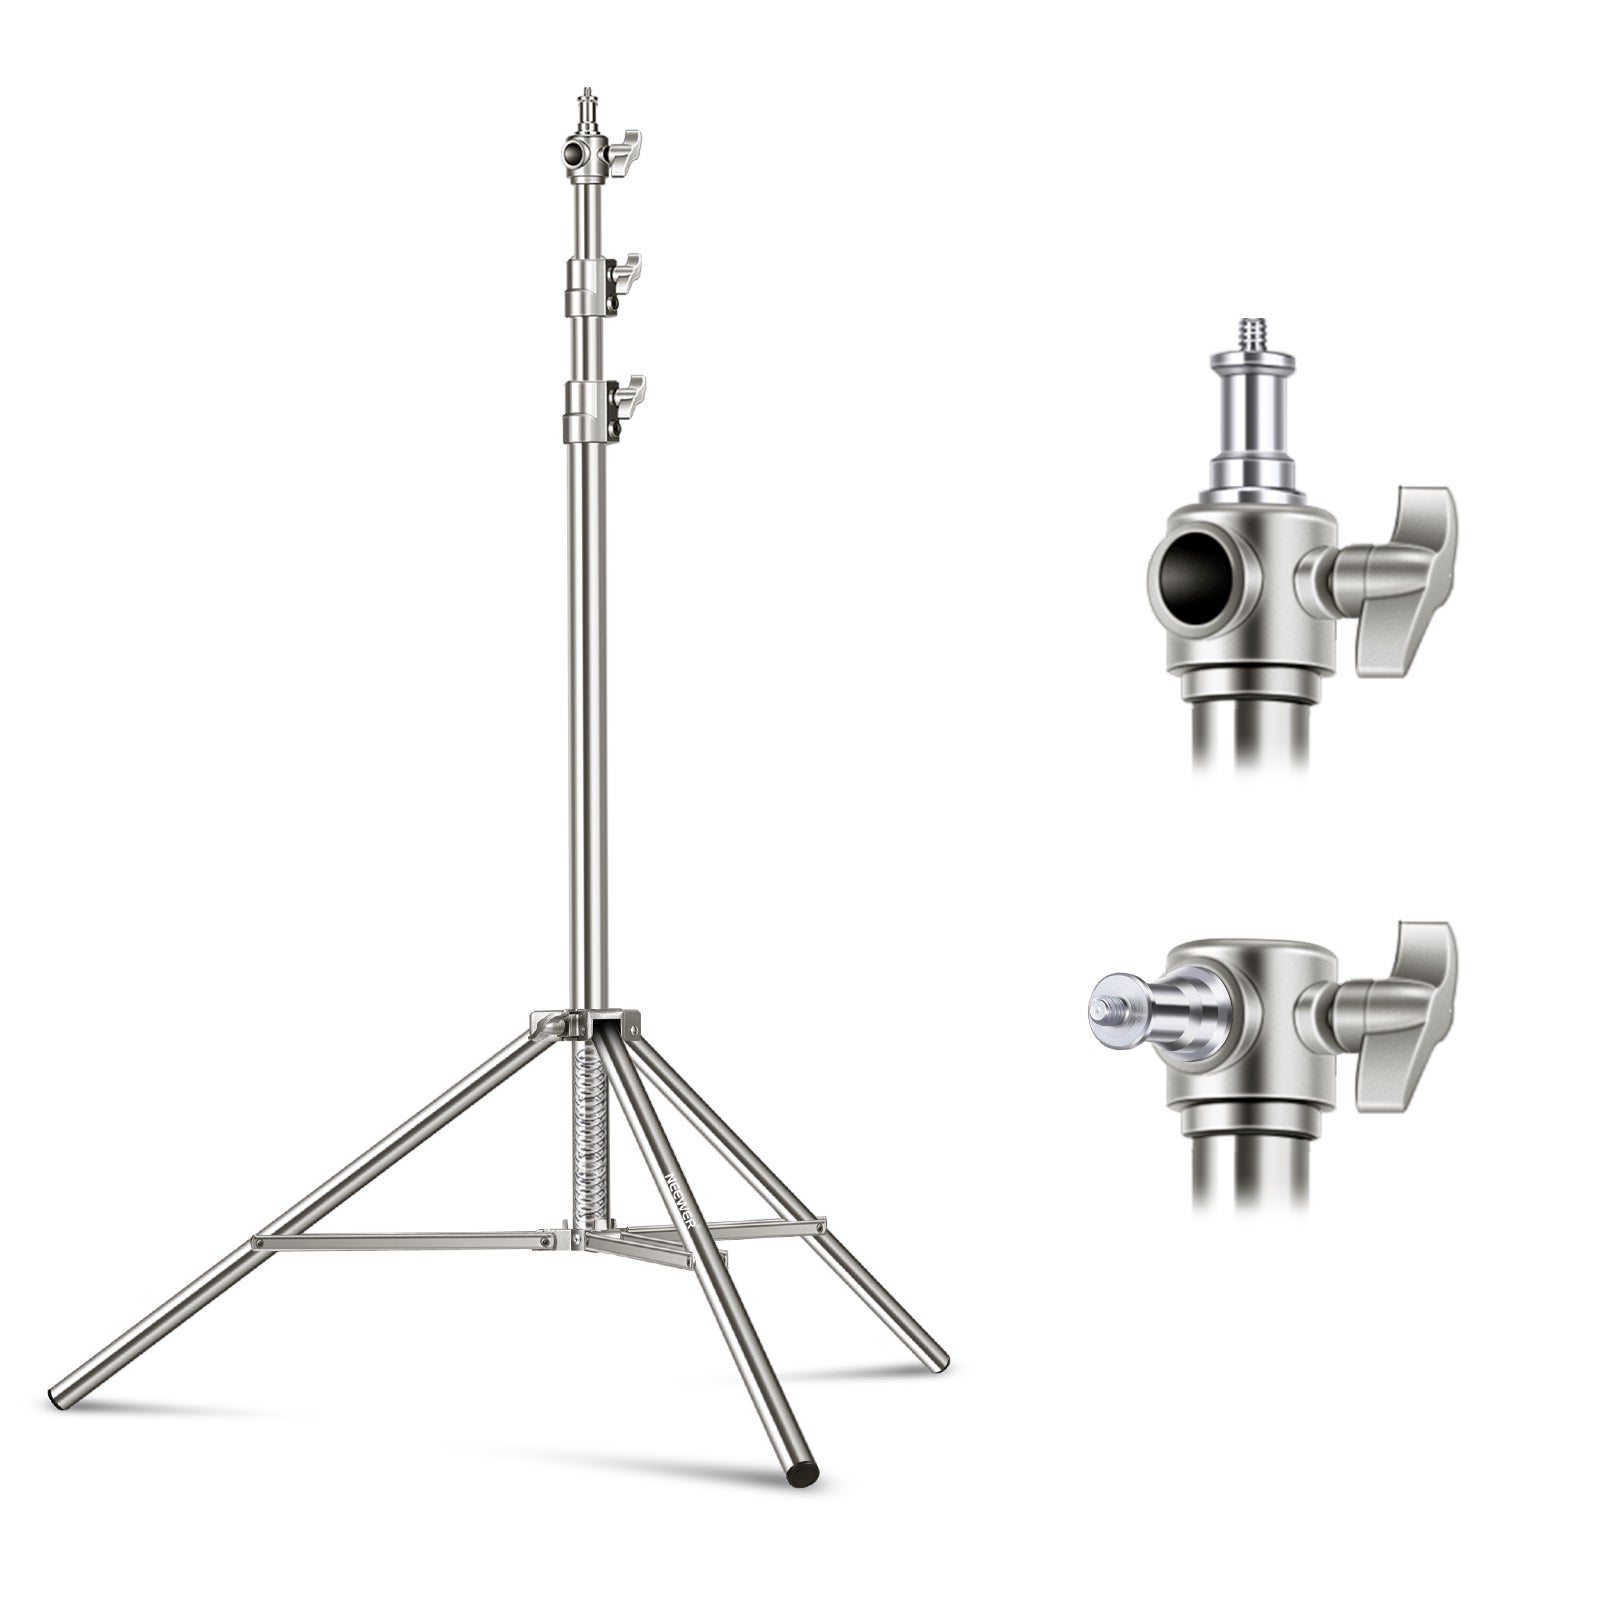 NEEWER 200cm Stainless Steel Photography Light Stand - NEEWER